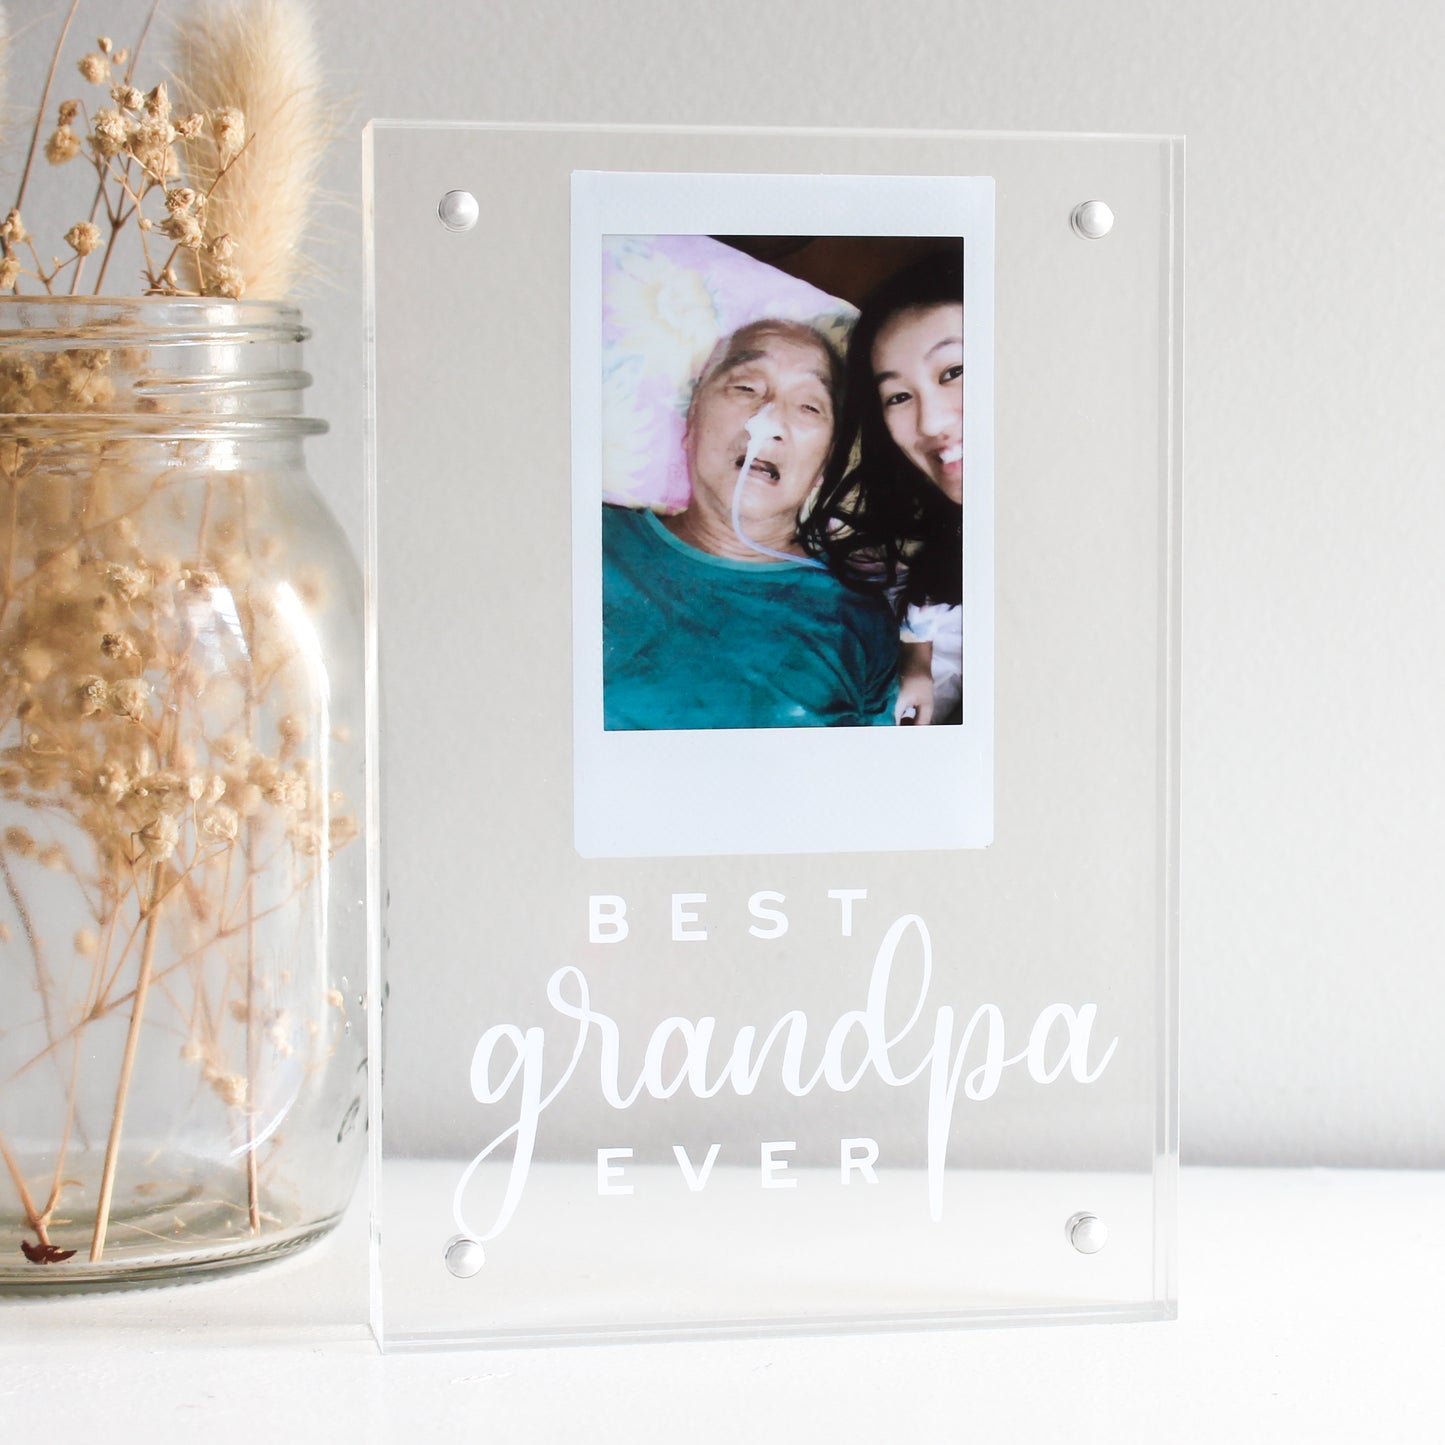 fathers day gift ideas gift ideas for grandpas gifts for him clear acrylic photo frame acrylic photo block personalised frame acrylic block gifts best dad ever frame best grandpa photo frame